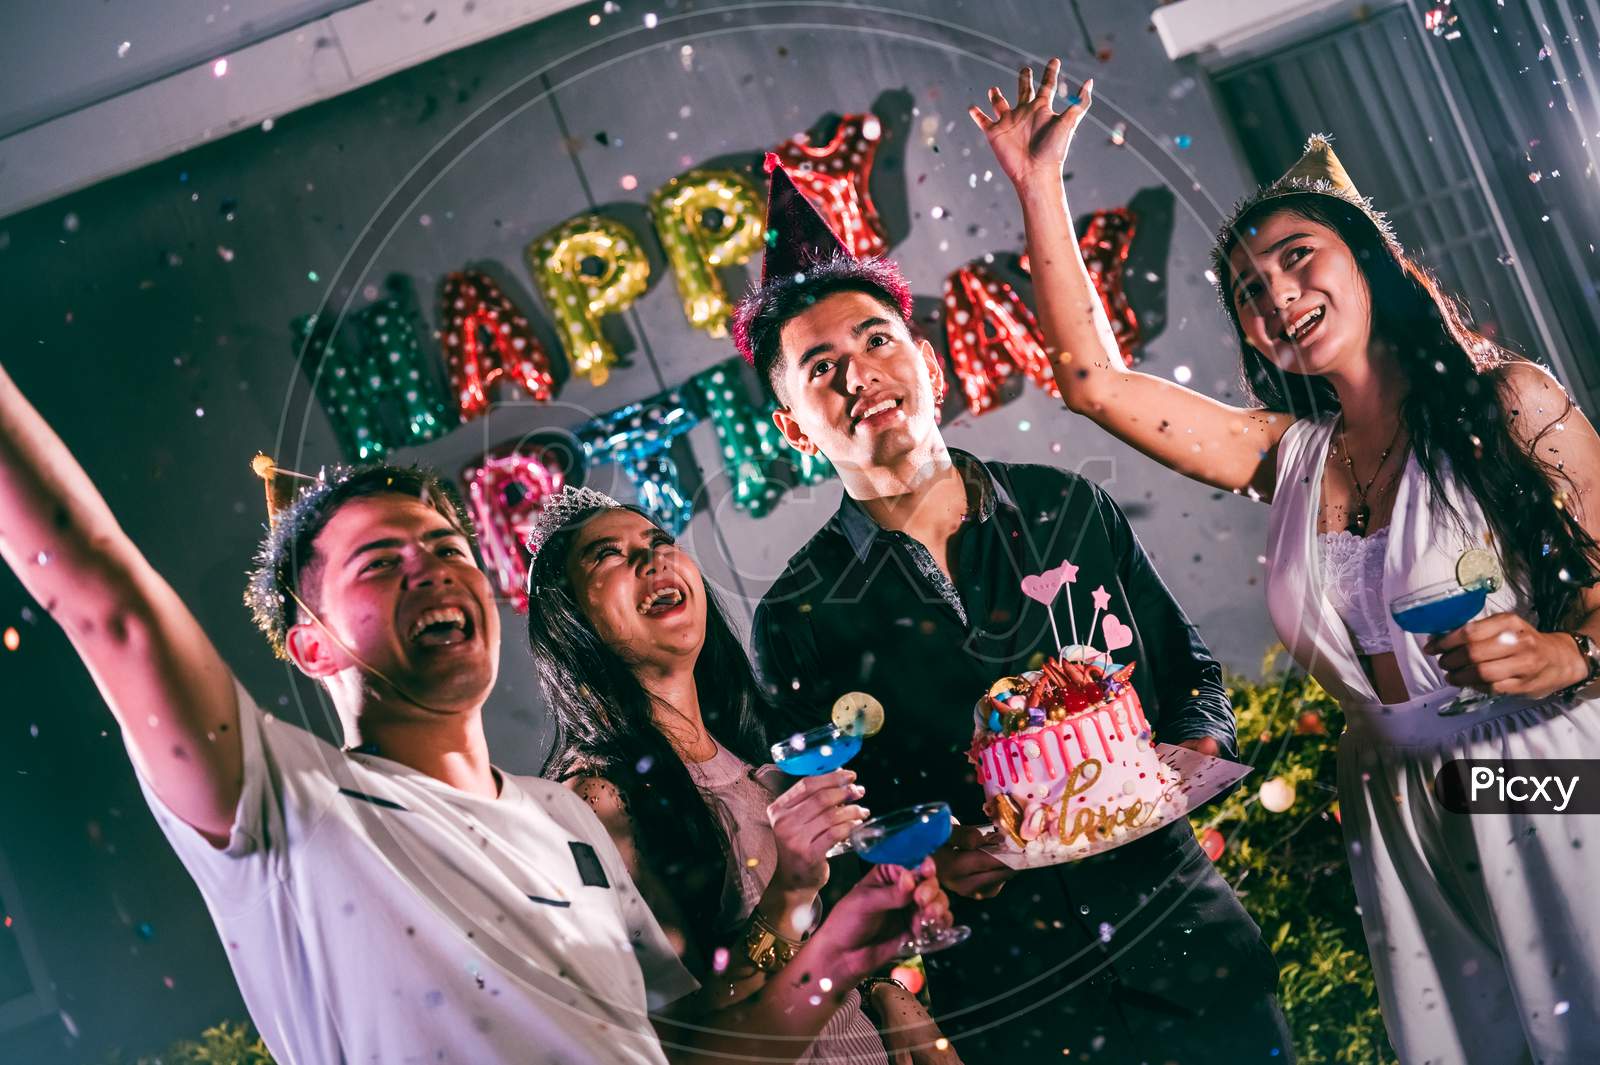 Asian Friends Having Fun In Birthday Party At Night Club With Birthday Cake. Event And Anniversary Concept. People Lifestyles And Friendship.